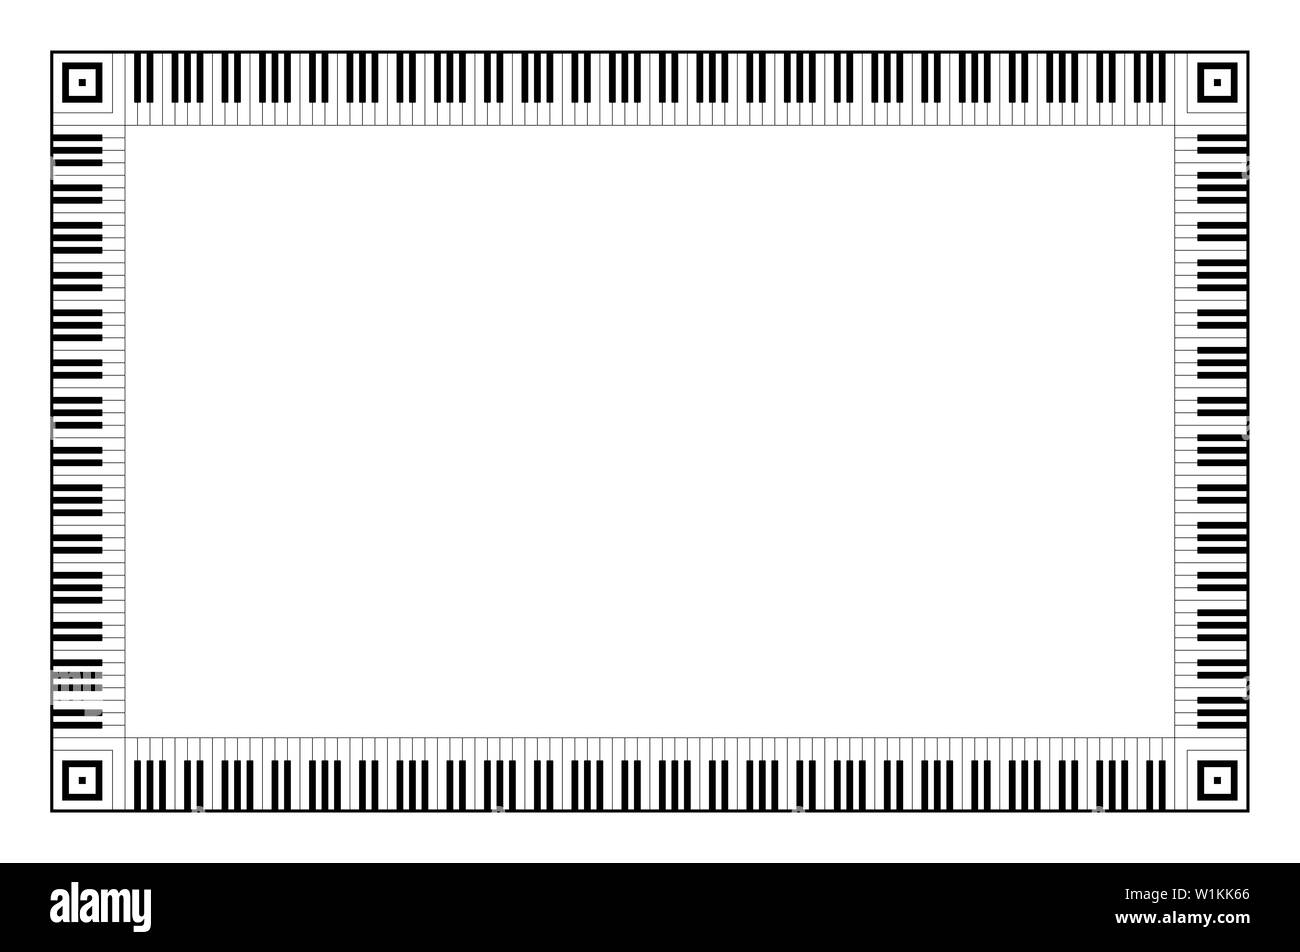 Musical keyboard rectangle frame, made of connected octave patterns. Decorative border, constructed from octaves, black and white piano keyboard keys. Stock Photo